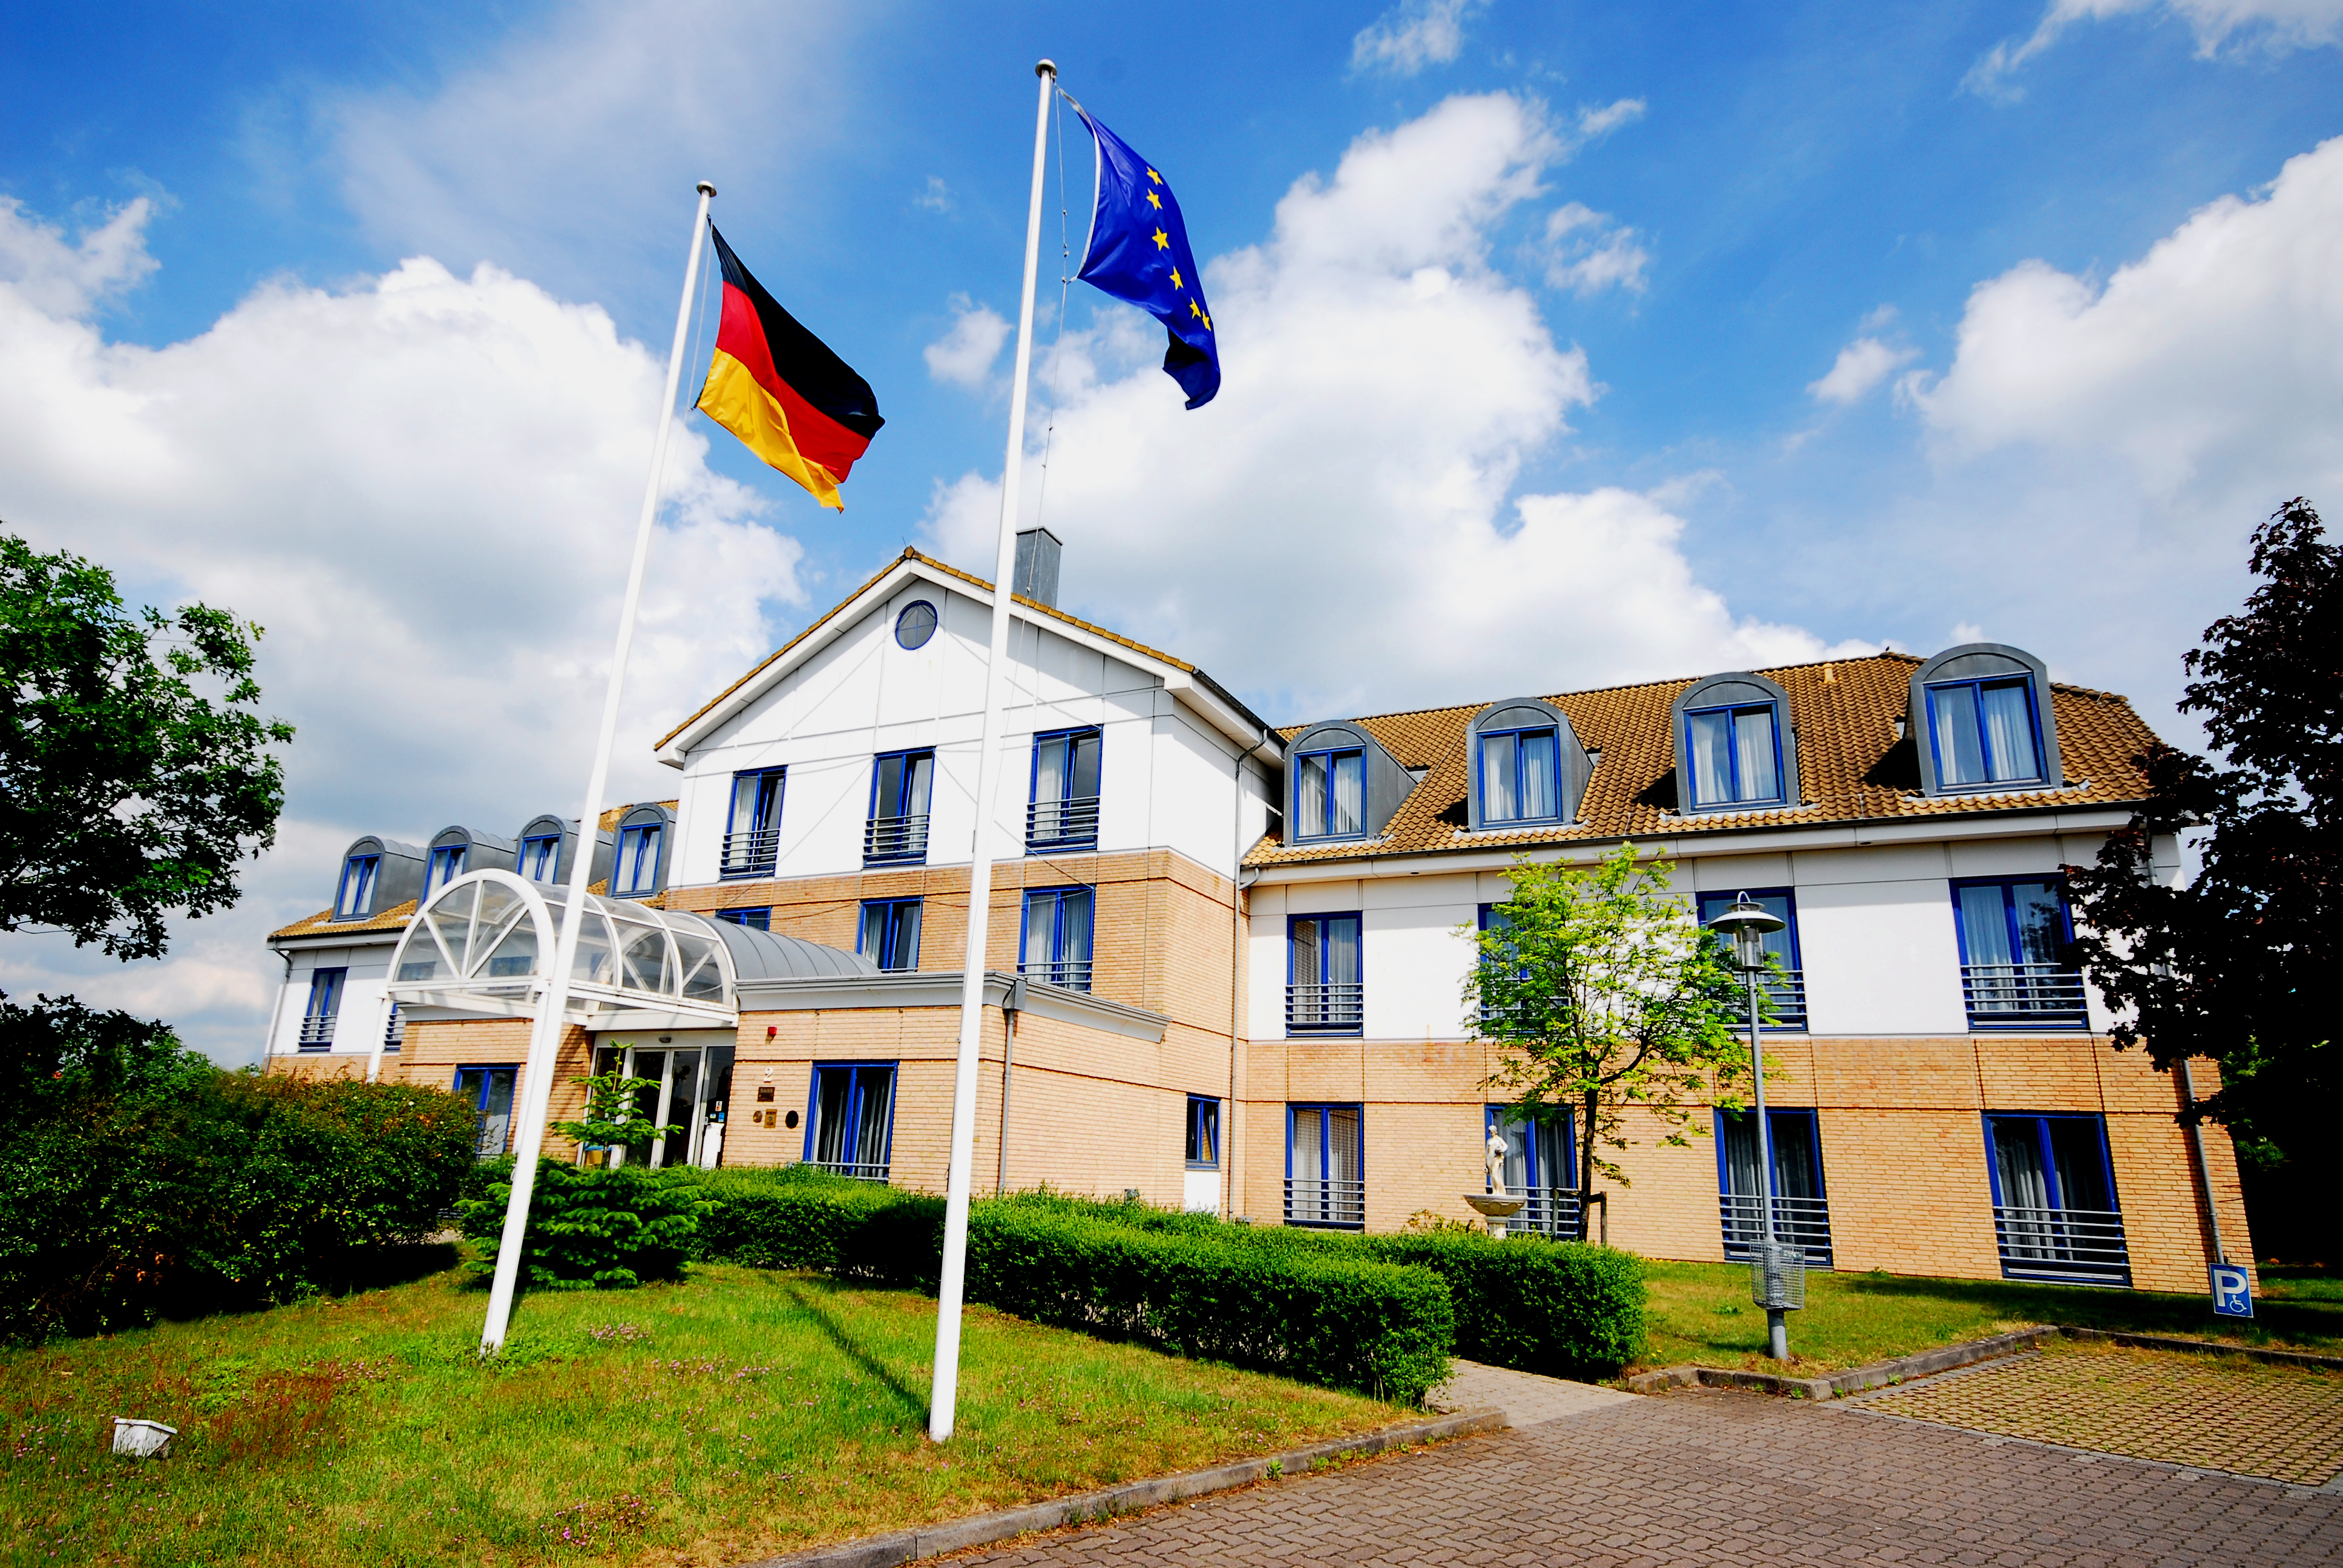 Best Western Hotel Helmstedt <br/>117.78 ew <br/> <a href='http://vakantieoplossing.nl/outpage/?id=fad9913e81f90e3581181278562749fc' target='_blank'>View Details</a>